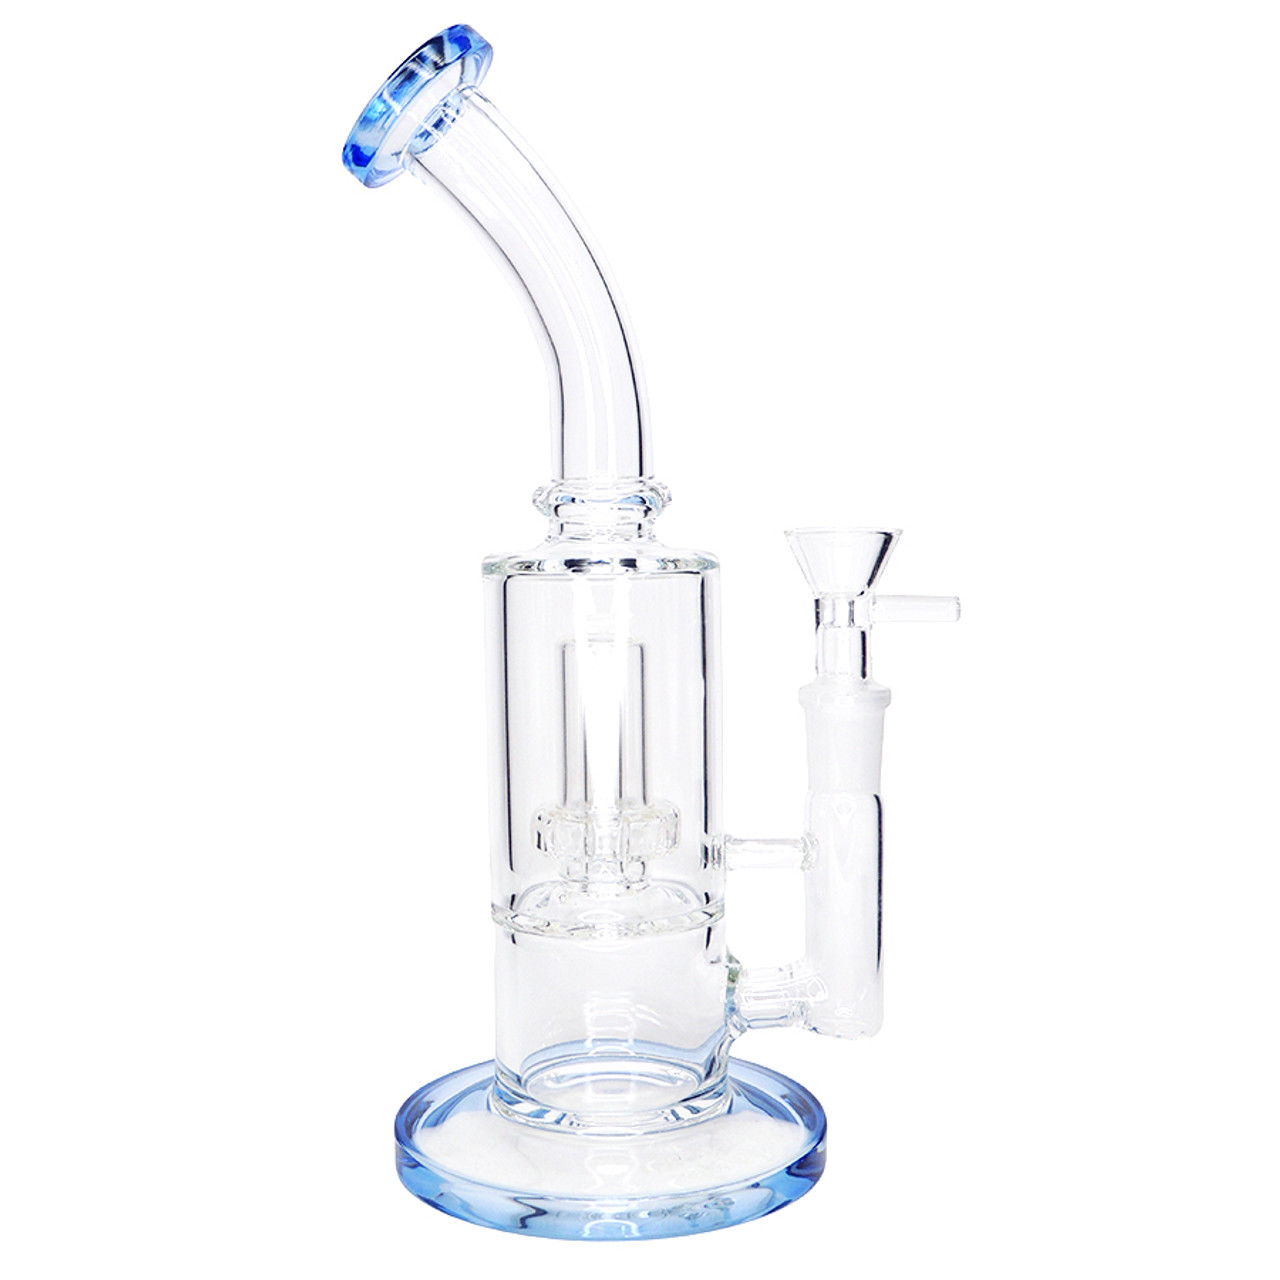 10" Bent with Elongated Showerhead Perc Water Pipe - Assorted Colors